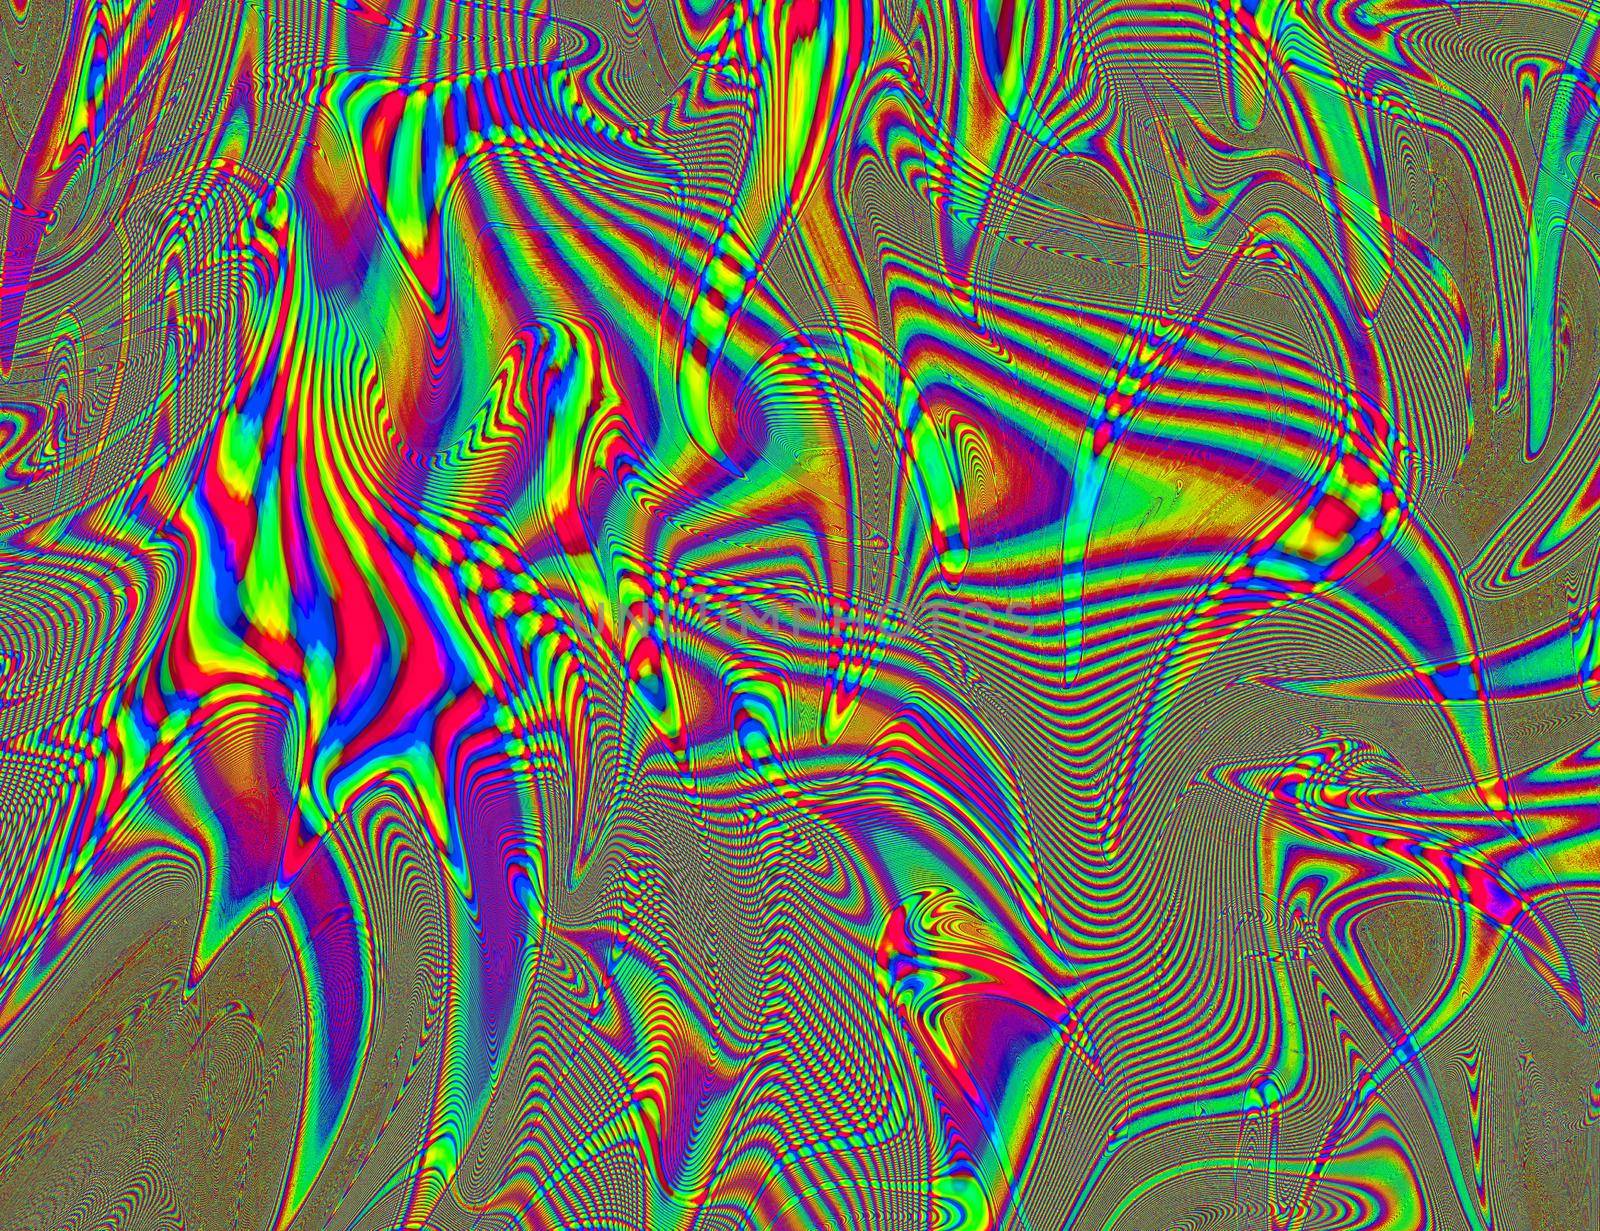 Trippy Psychedelic Rainbow Background Glitch LSD Colorful Wallpaper. 60s Abstract Hypnotic Illusion. Hippie Retro Texture. hallucinations by DesignAB